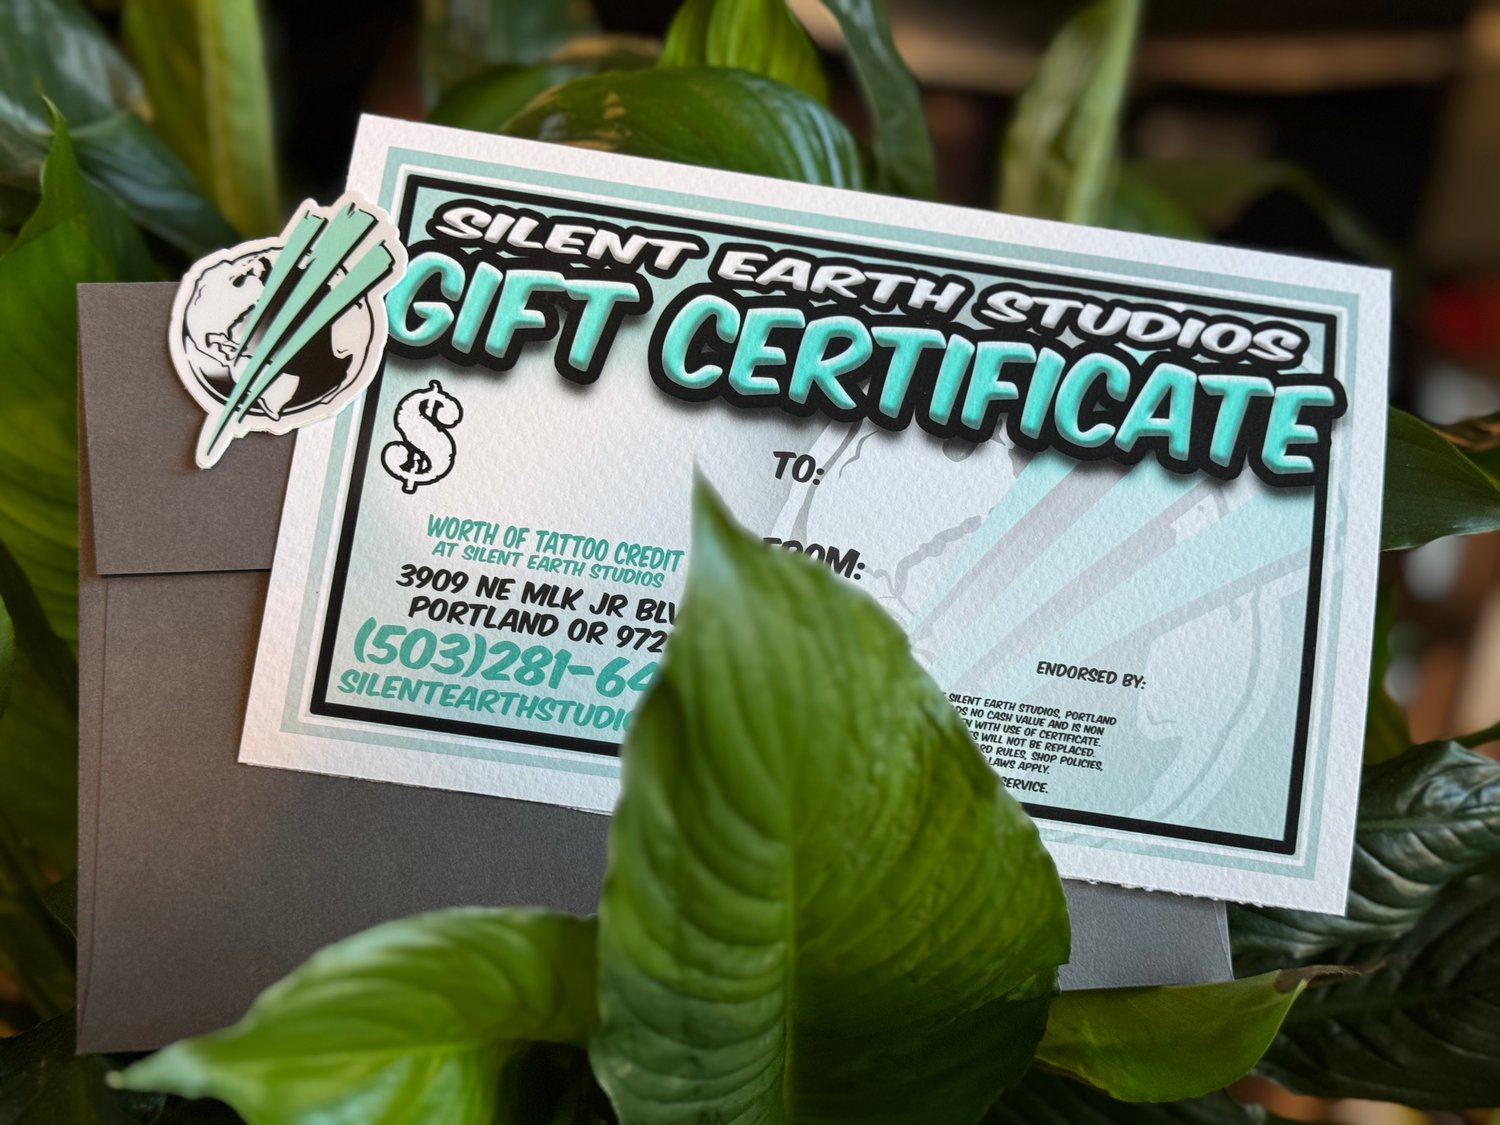 Image of SILENT EARTH GIFT CERTIFICATE